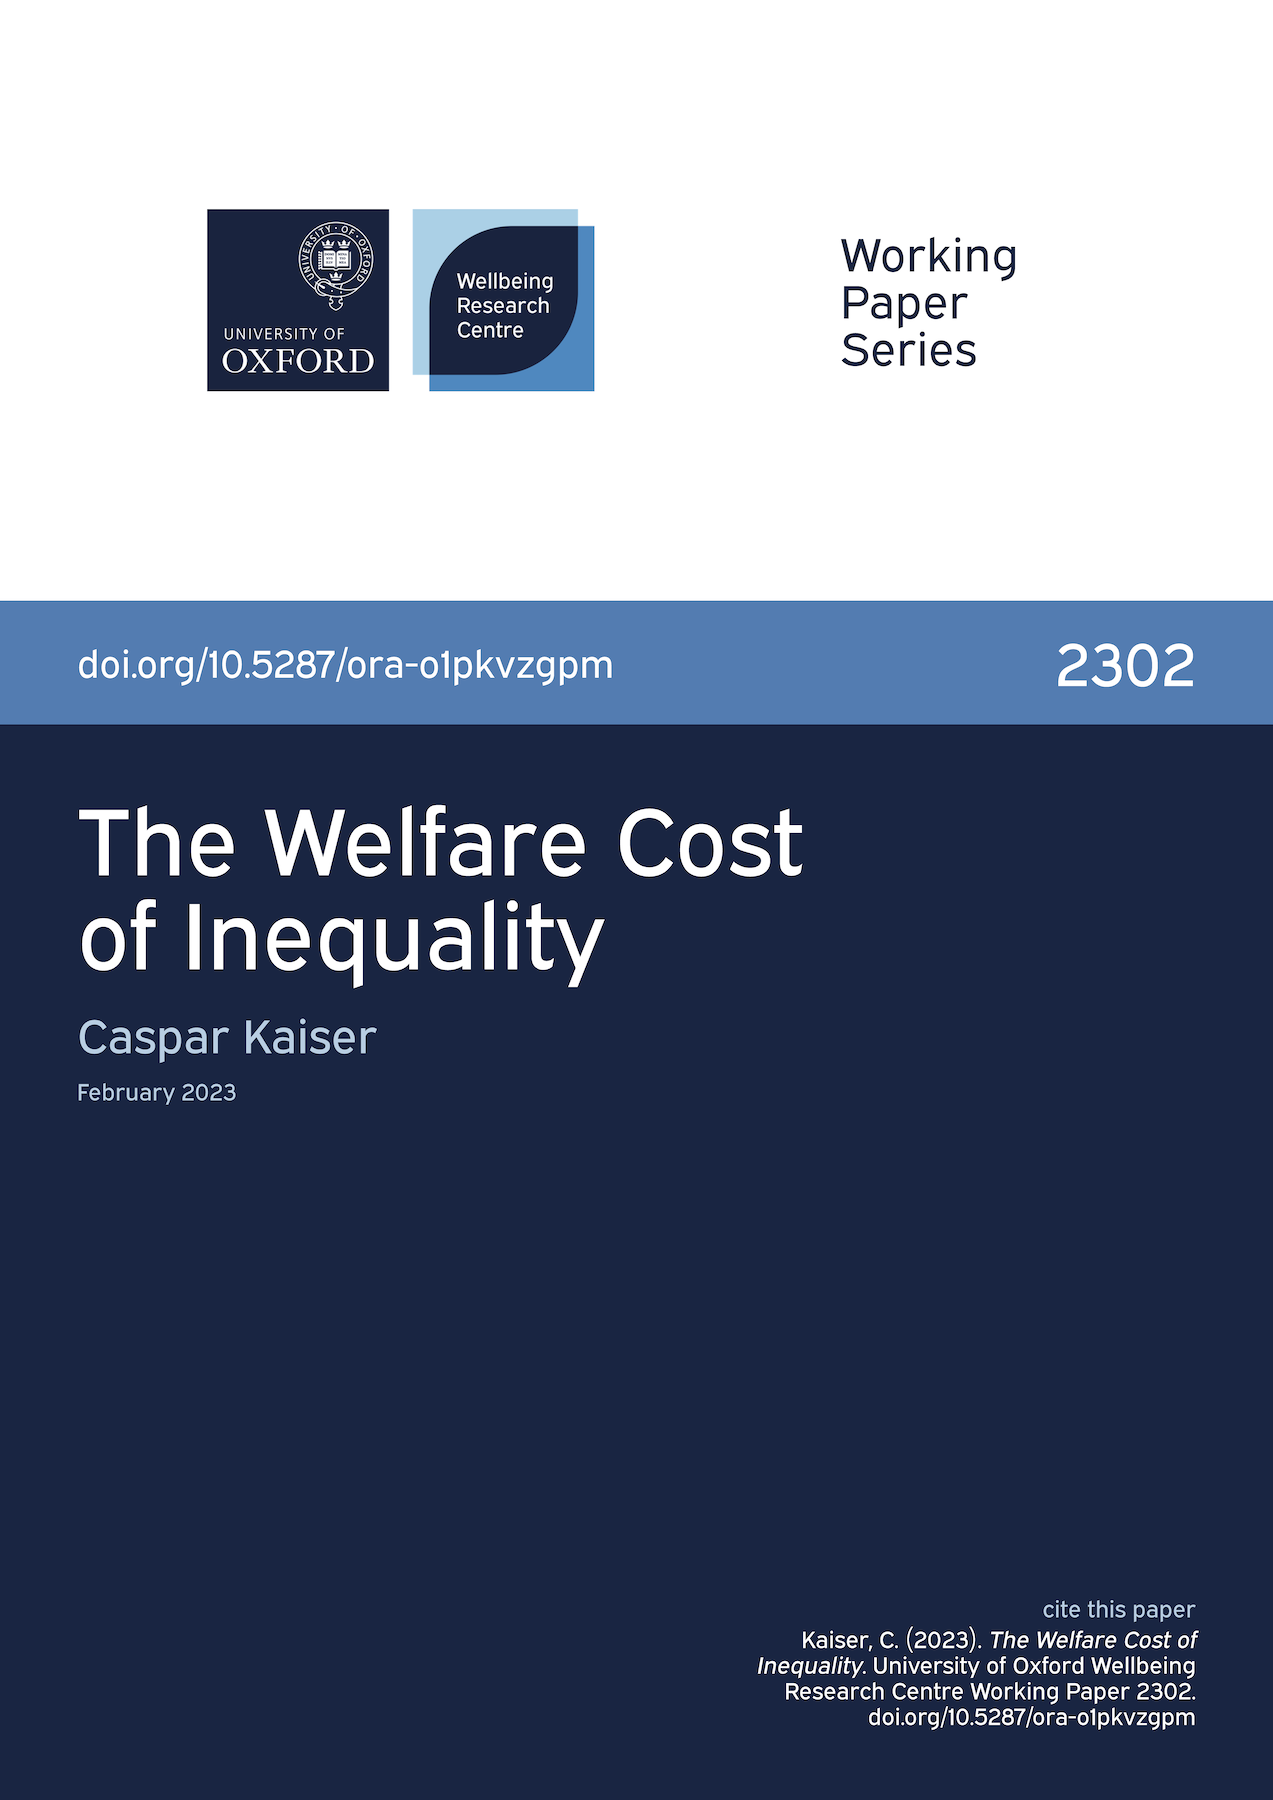 Cover for Working Paper 2302, The Welfare Cost of Inequality.